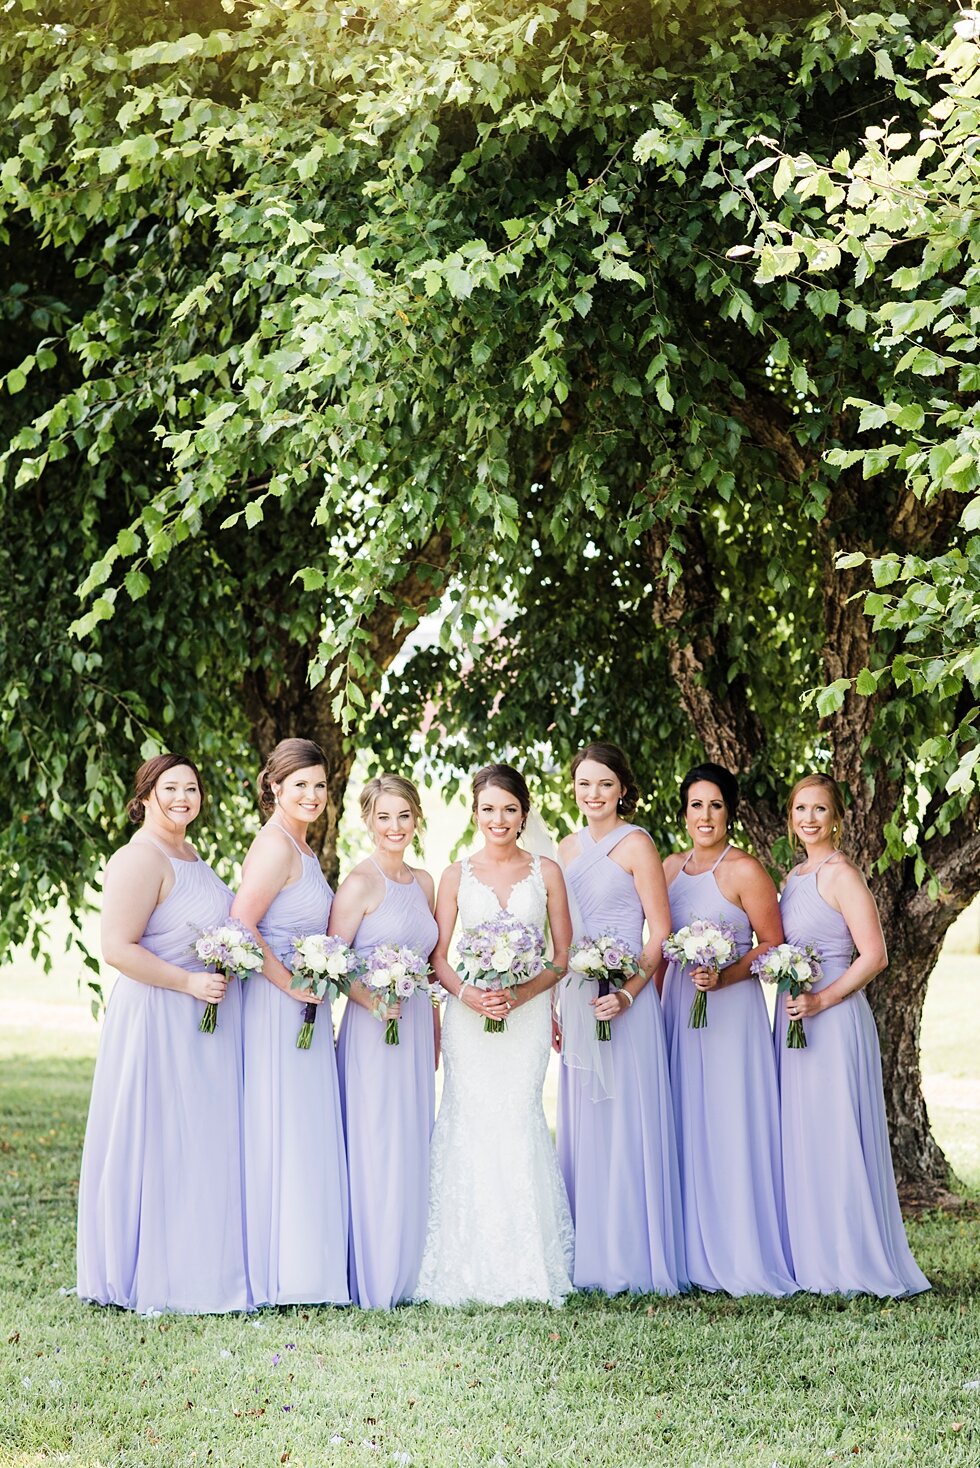  Bride smiles with her bridesmaids on wedding day as they support her on her big day. #thatsdarling #weddingday #weddinginspiration #weddingphoto #love #justmarried #midwestphotographer #kywedding #louisville #kentuckywedding #auburnkyweddingphotogra